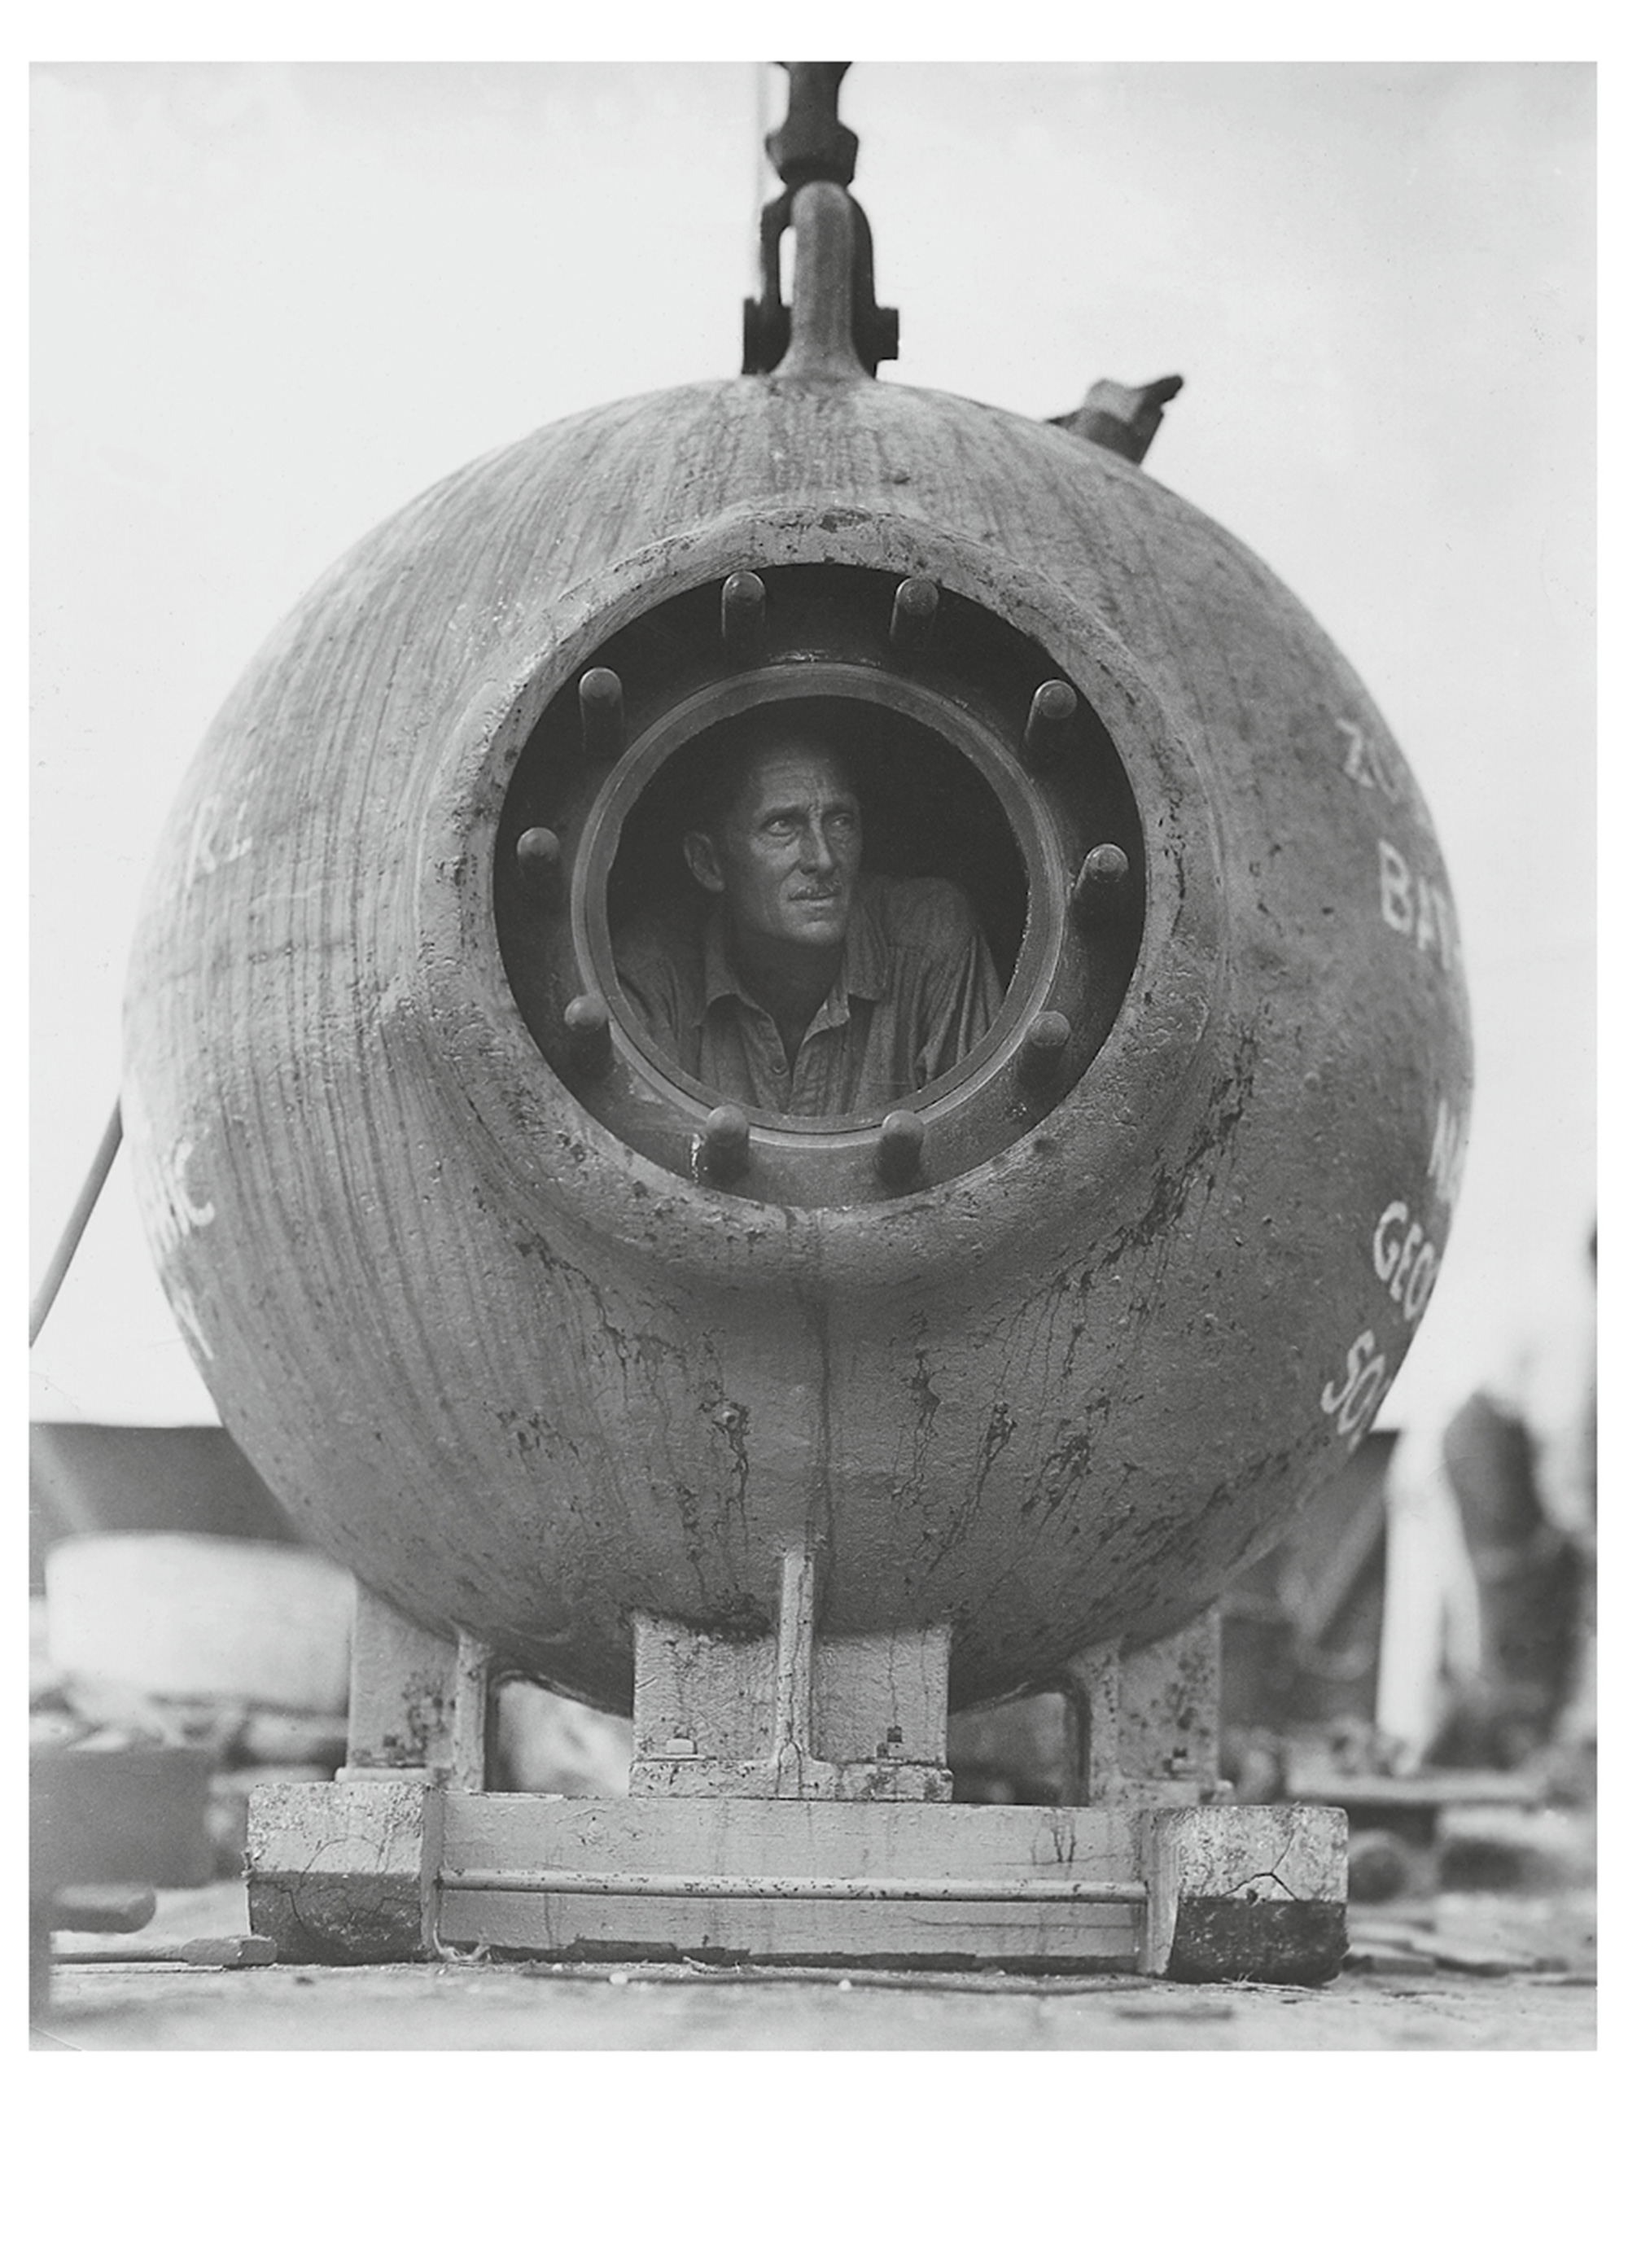 A circa early nineteen thirties photograph of William Beebe in the Bathysphere.